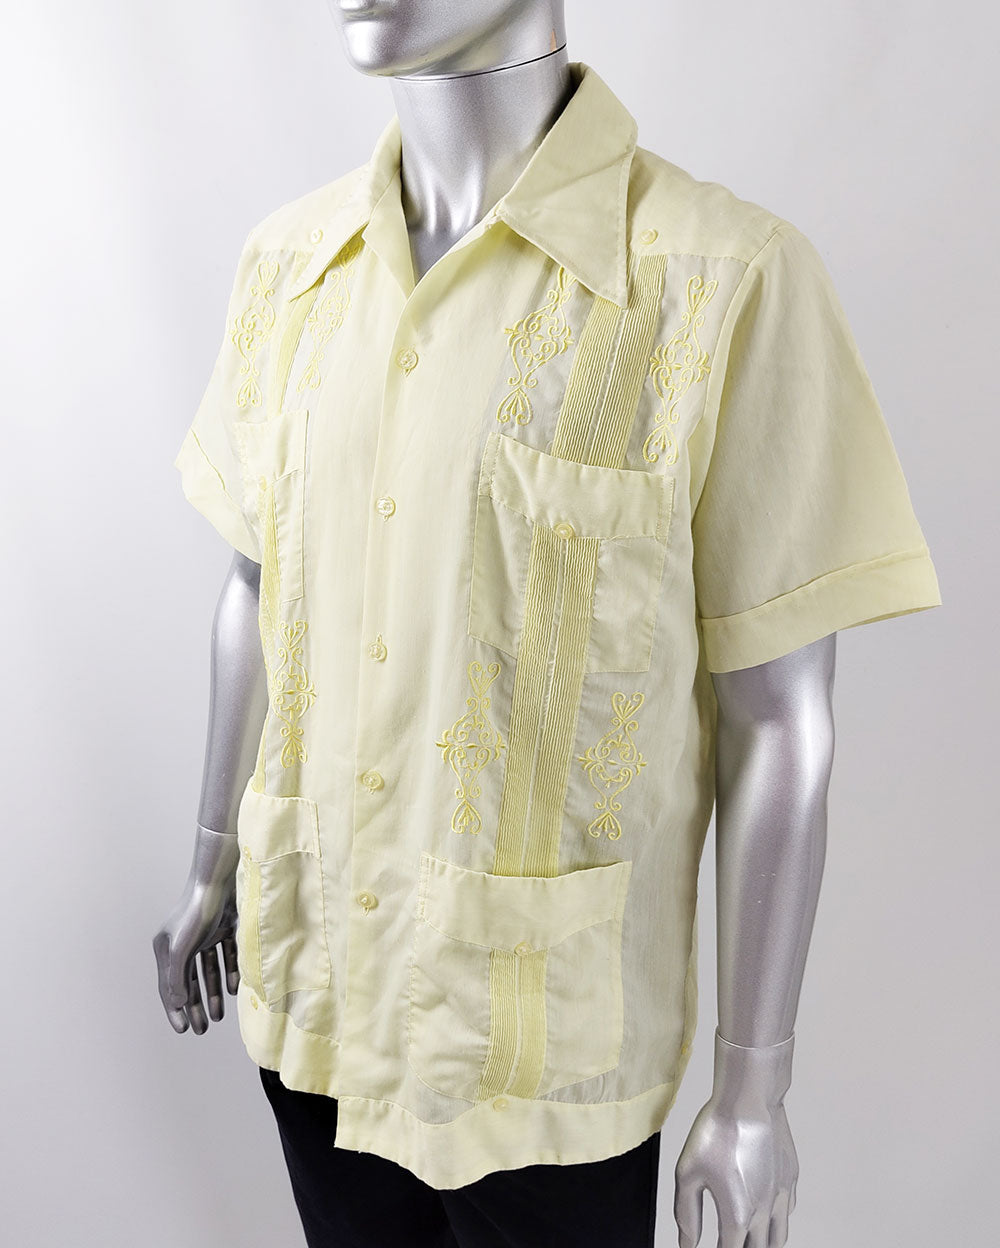 An image of a vintage yellow mexican mens shirt from the 1970s with embroidery and pintuck details. 